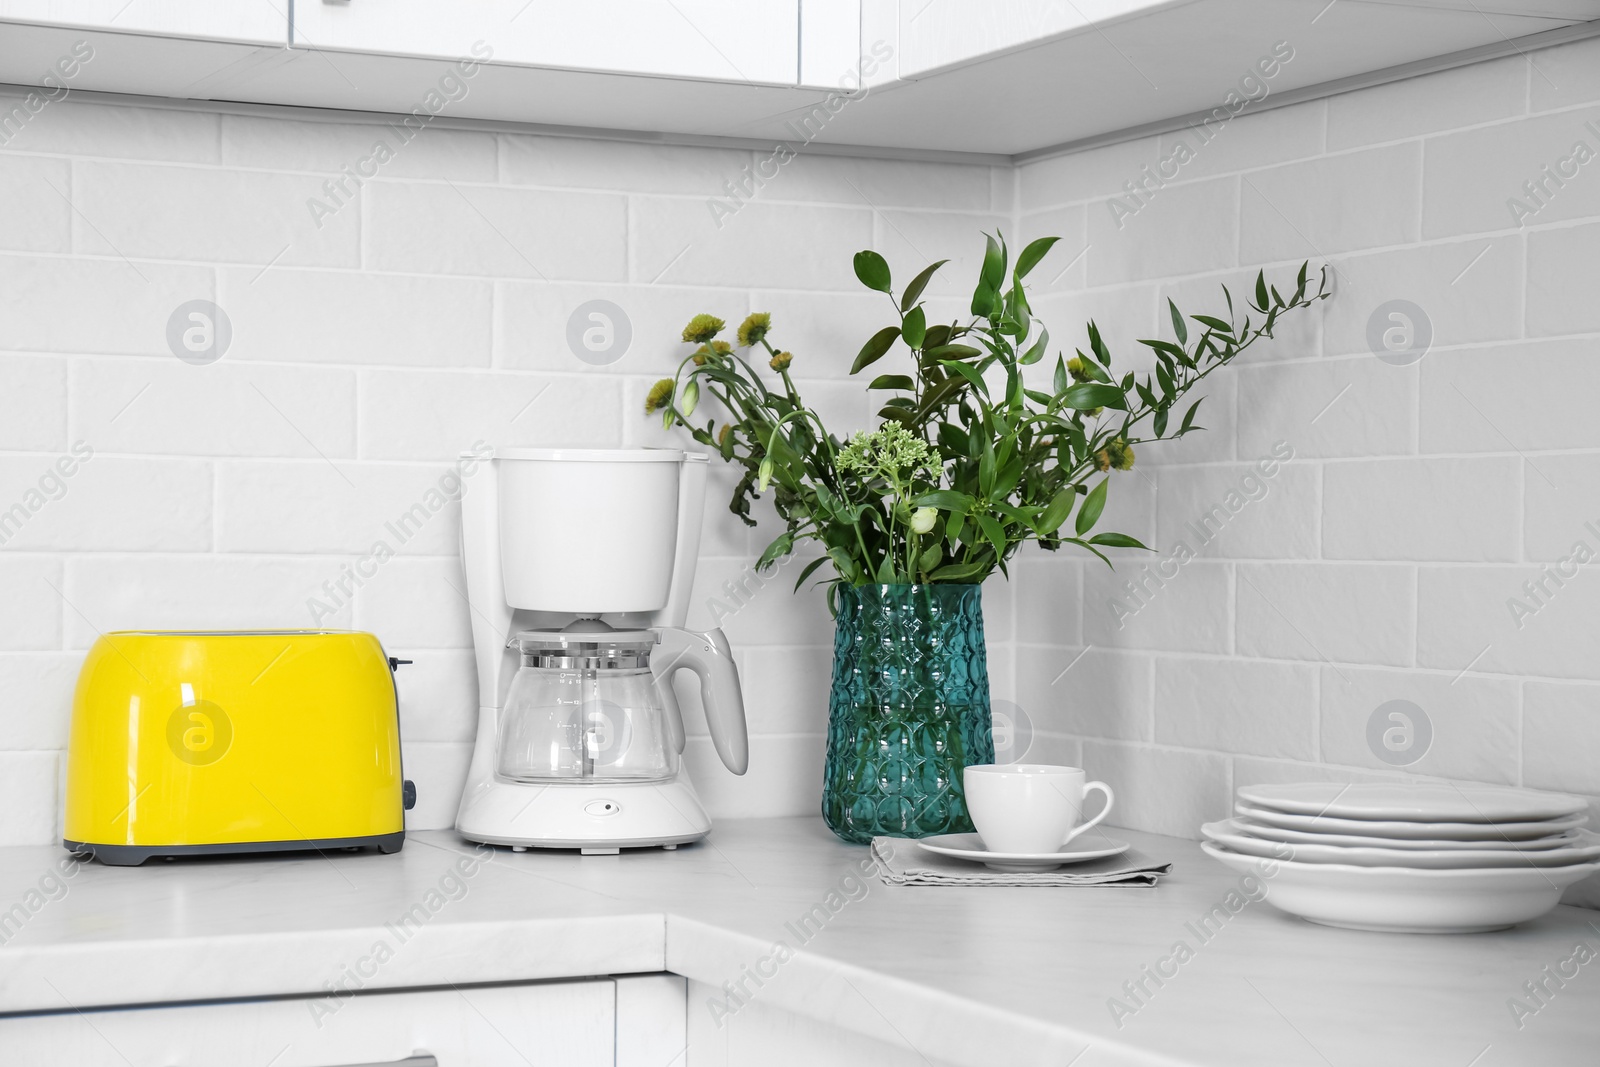 Photo of Modern yellow toaster, coffeemaker and dishware on countertop in kitchen